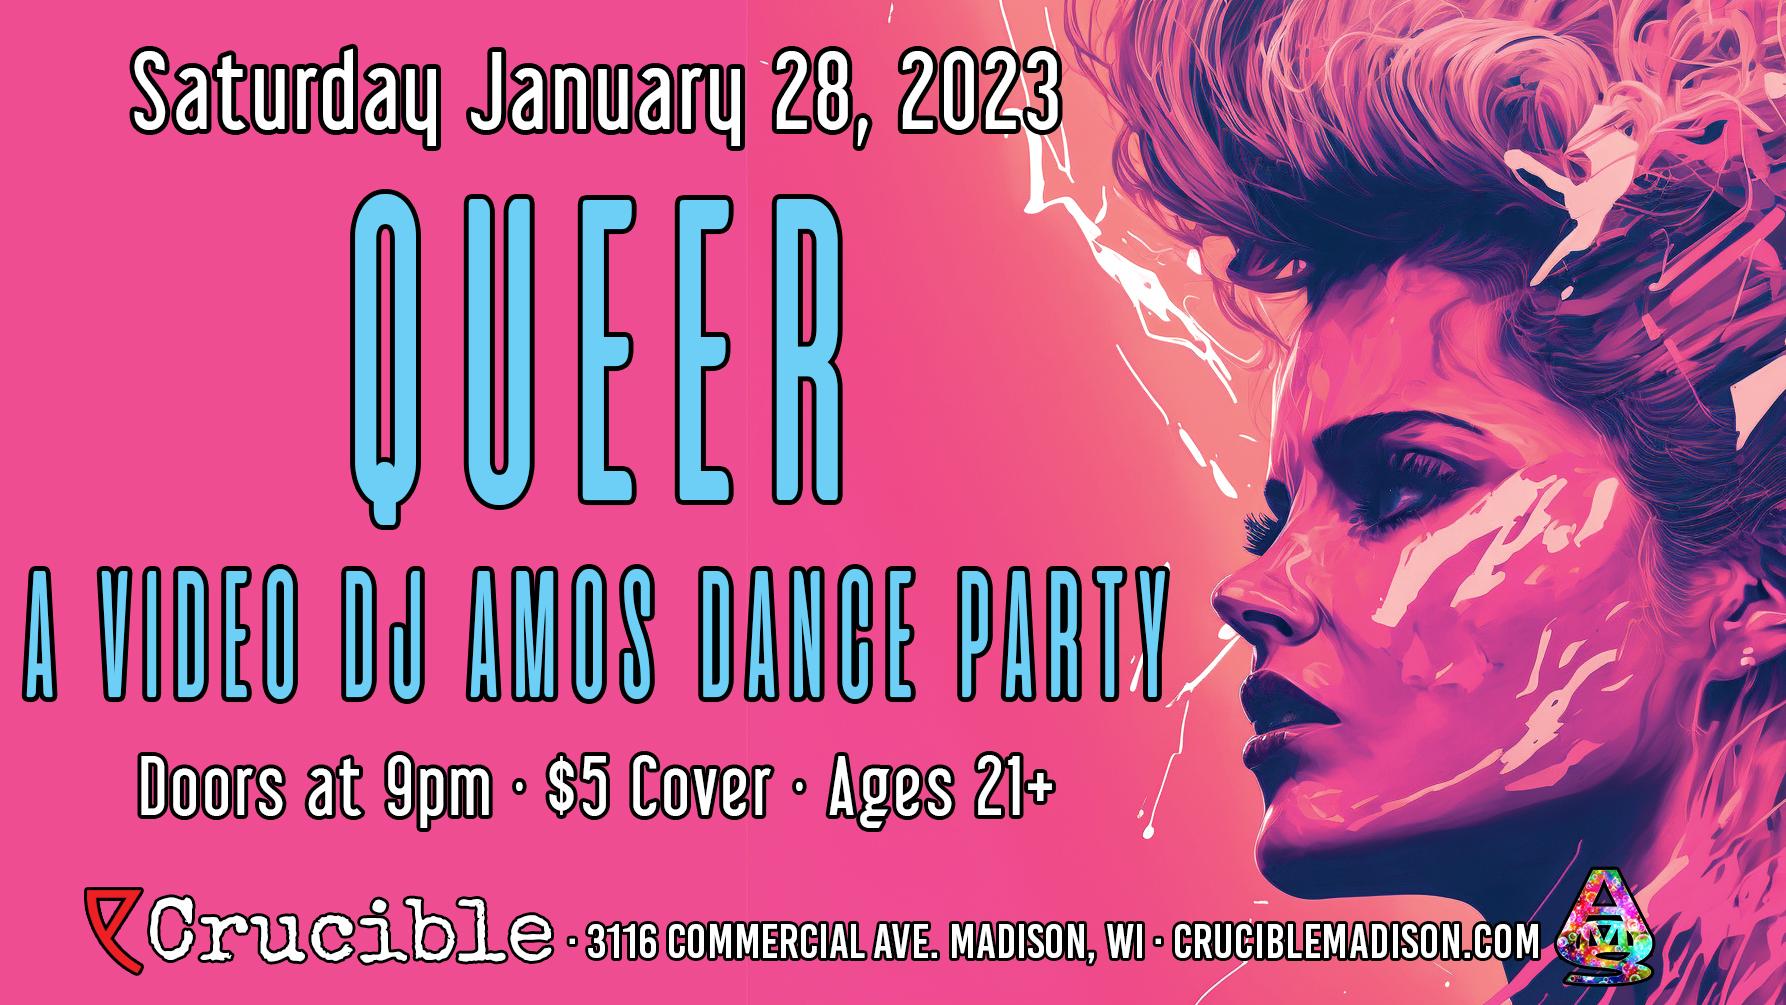 queer: a dj amos video dance party